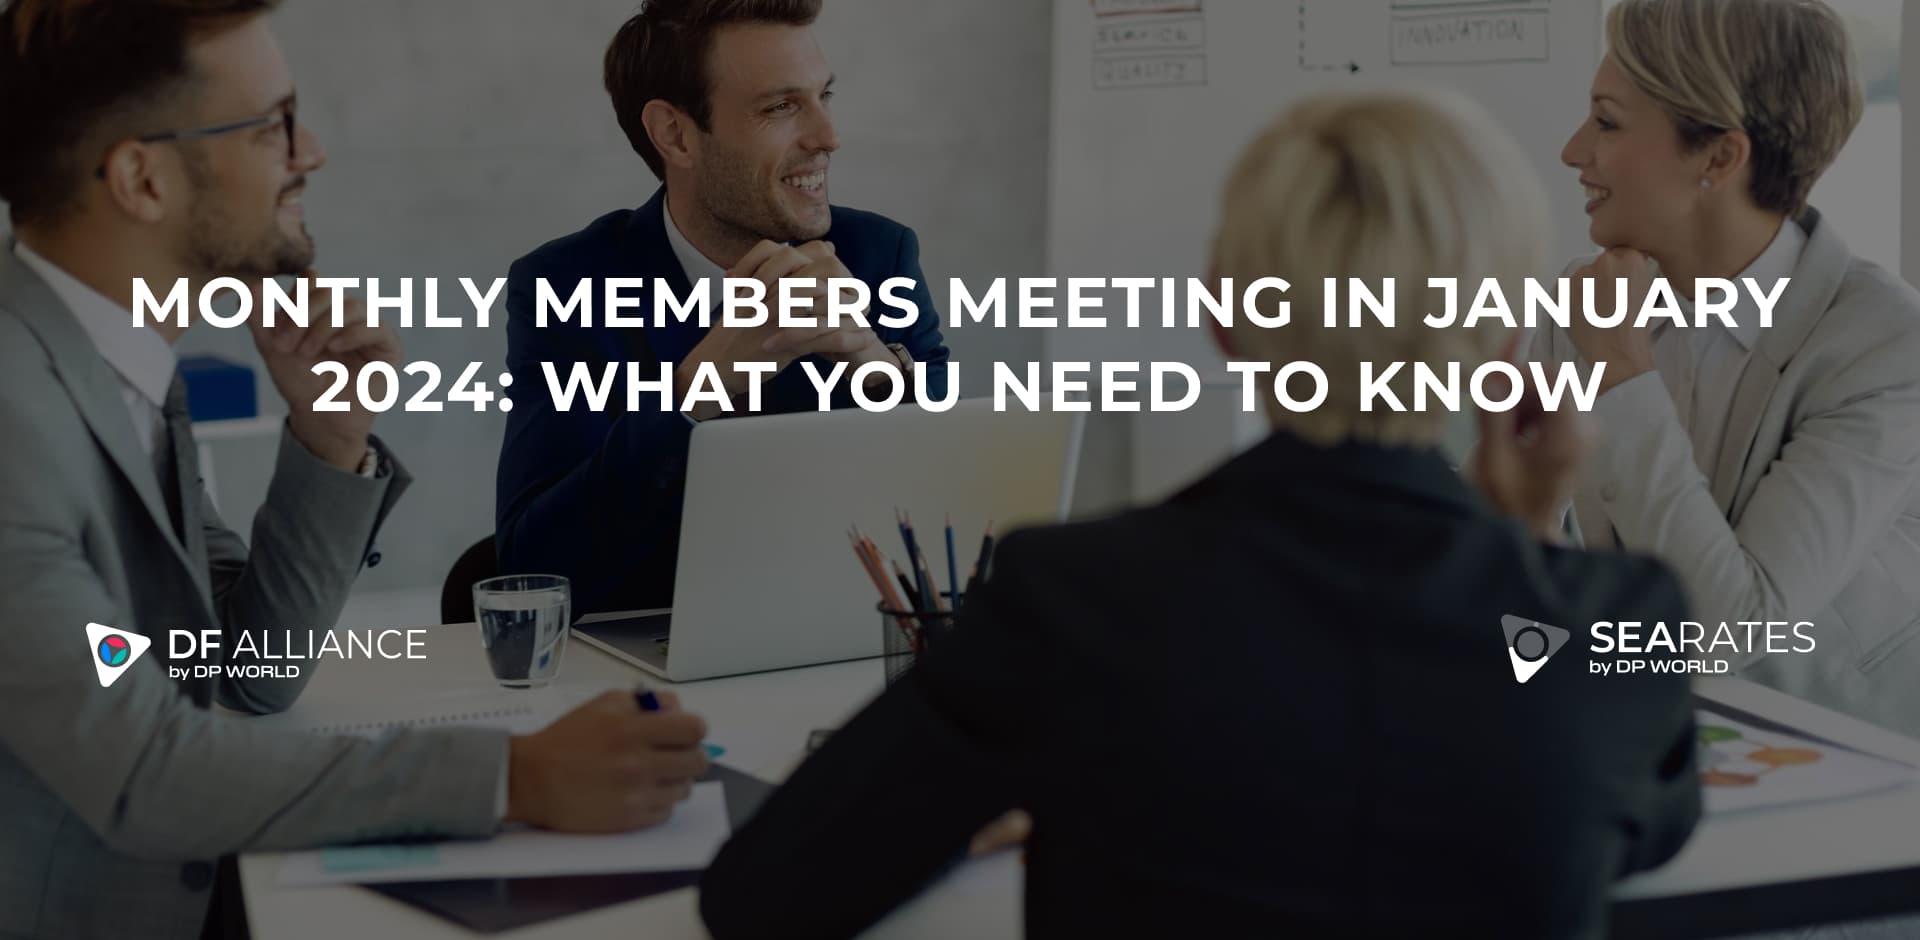 Monthly Members Meeting in January 2024: What You Need to Know